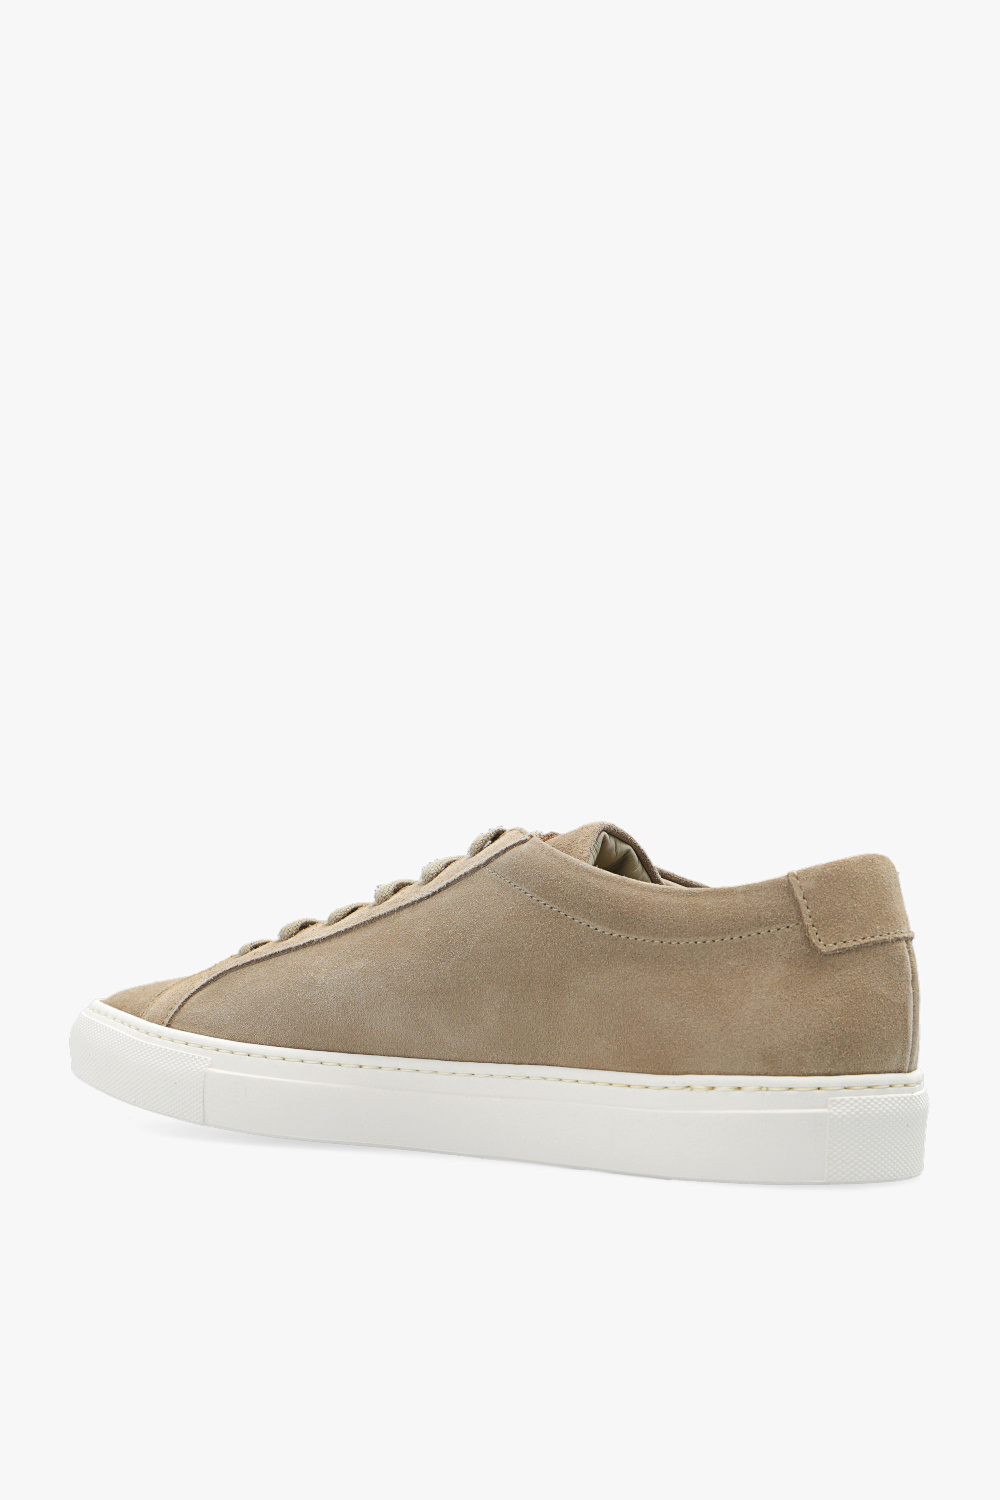 Church's Shine Fume polished shoes - GenesinlifeShops Germany - 'Achilles  Low' sneakers Common Projects